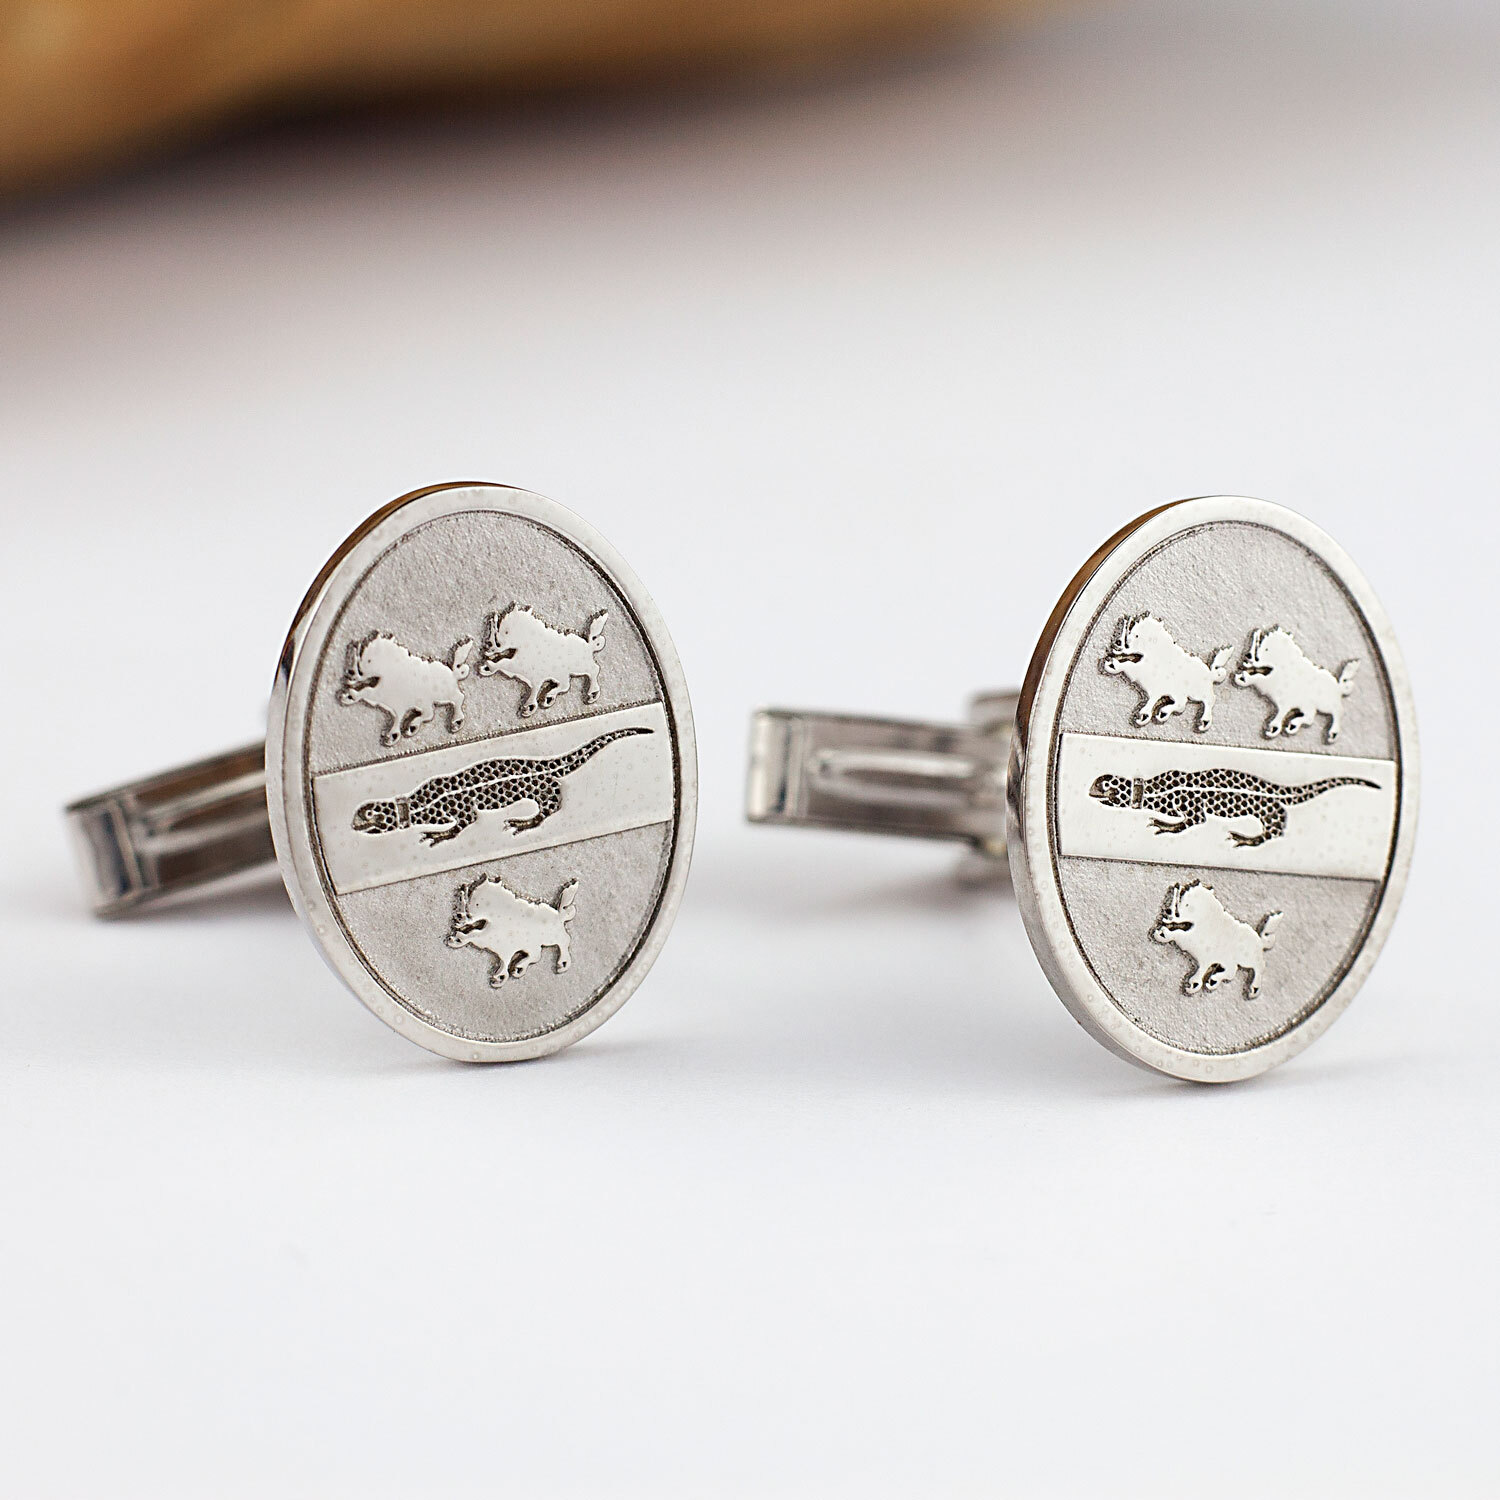 Select Gifts Fahy Ireland Heraldry Crest Sterling Silver Cufflinks Engraved Message Box